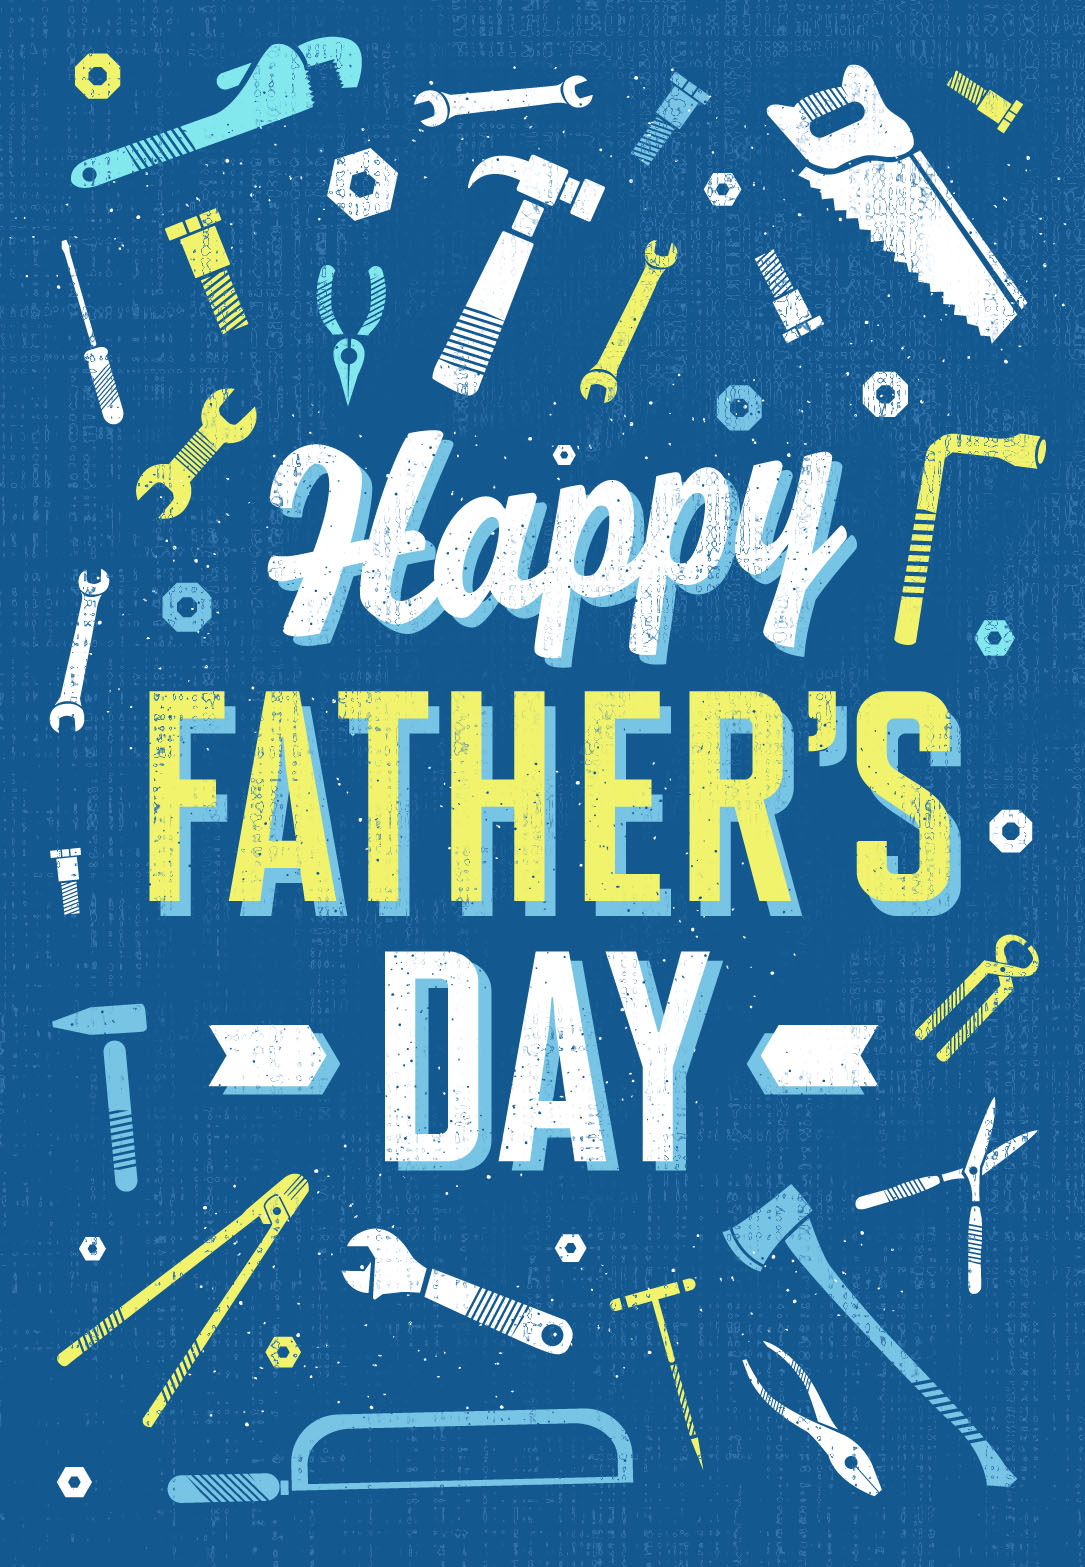 Retro Working Tools Father s Day Card Free Greetings 